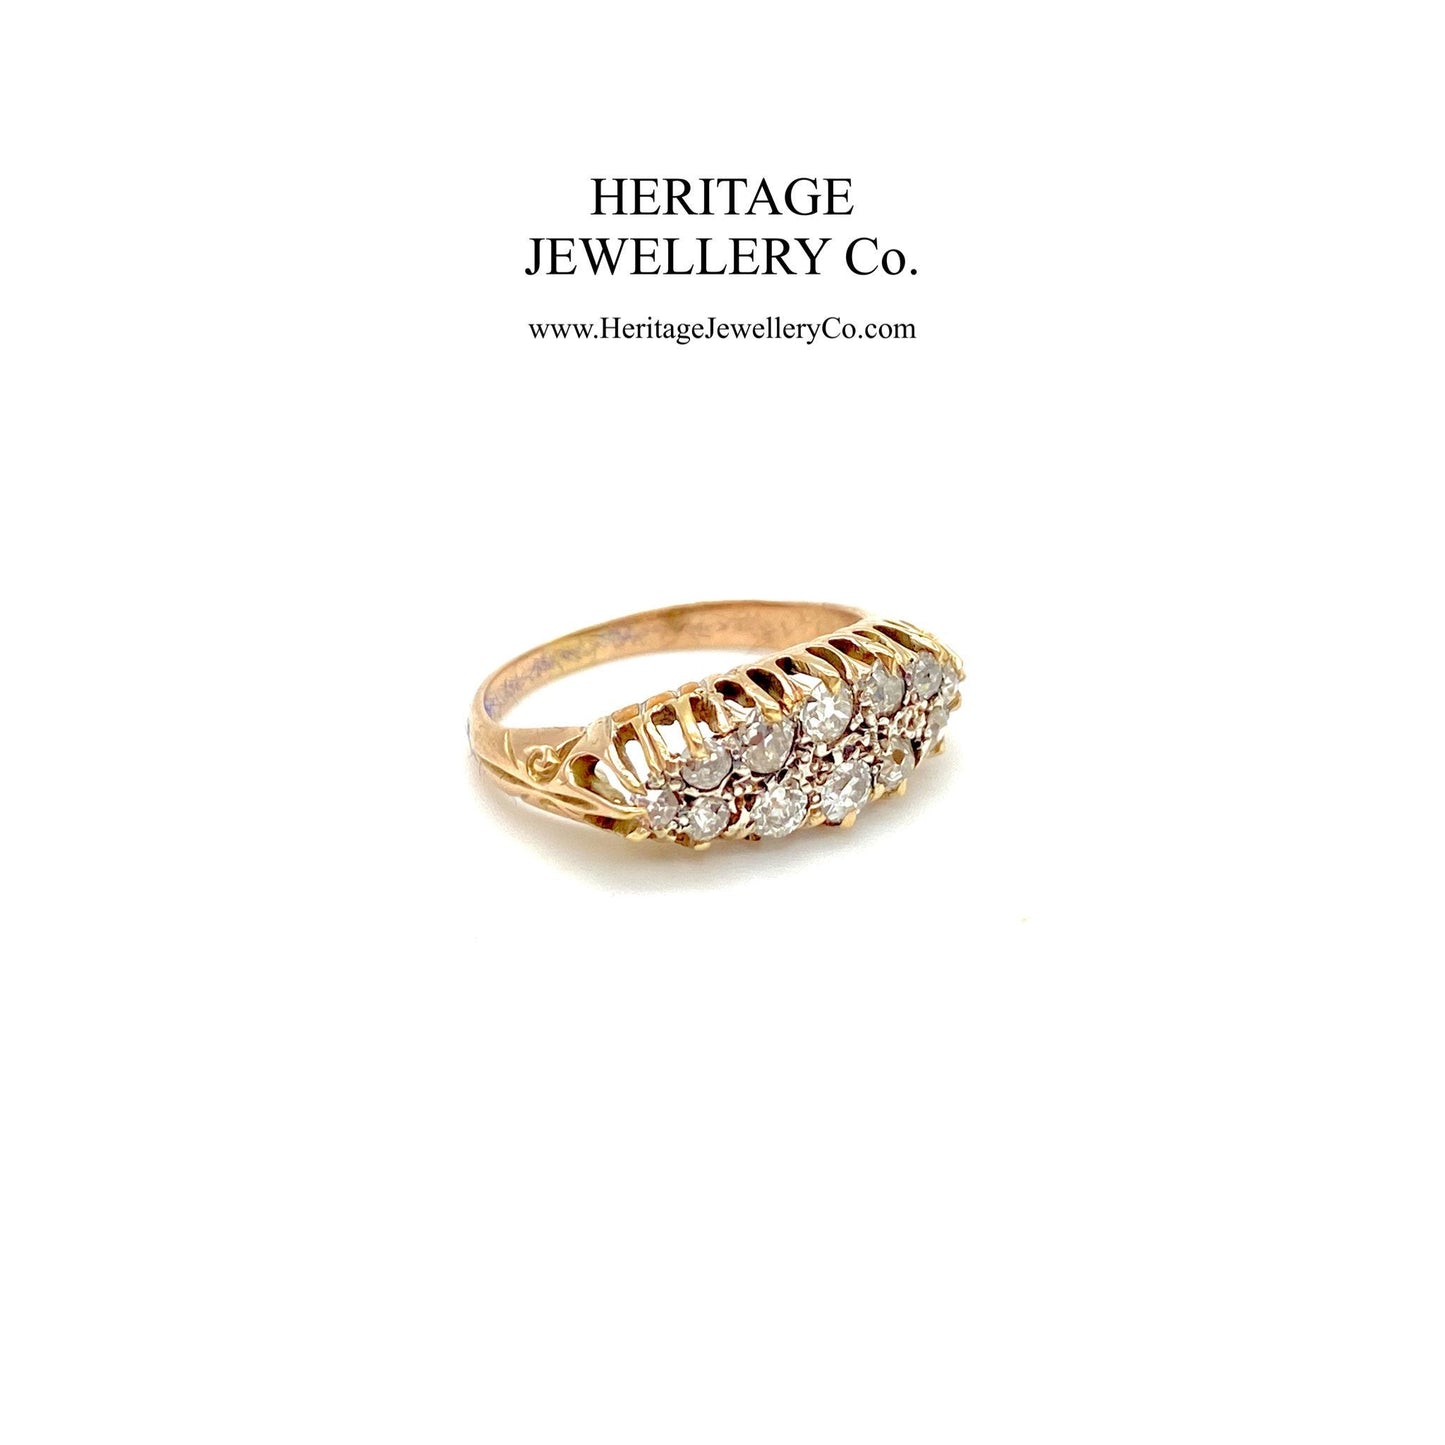 Antique Gold Two-Row Diamond Ring